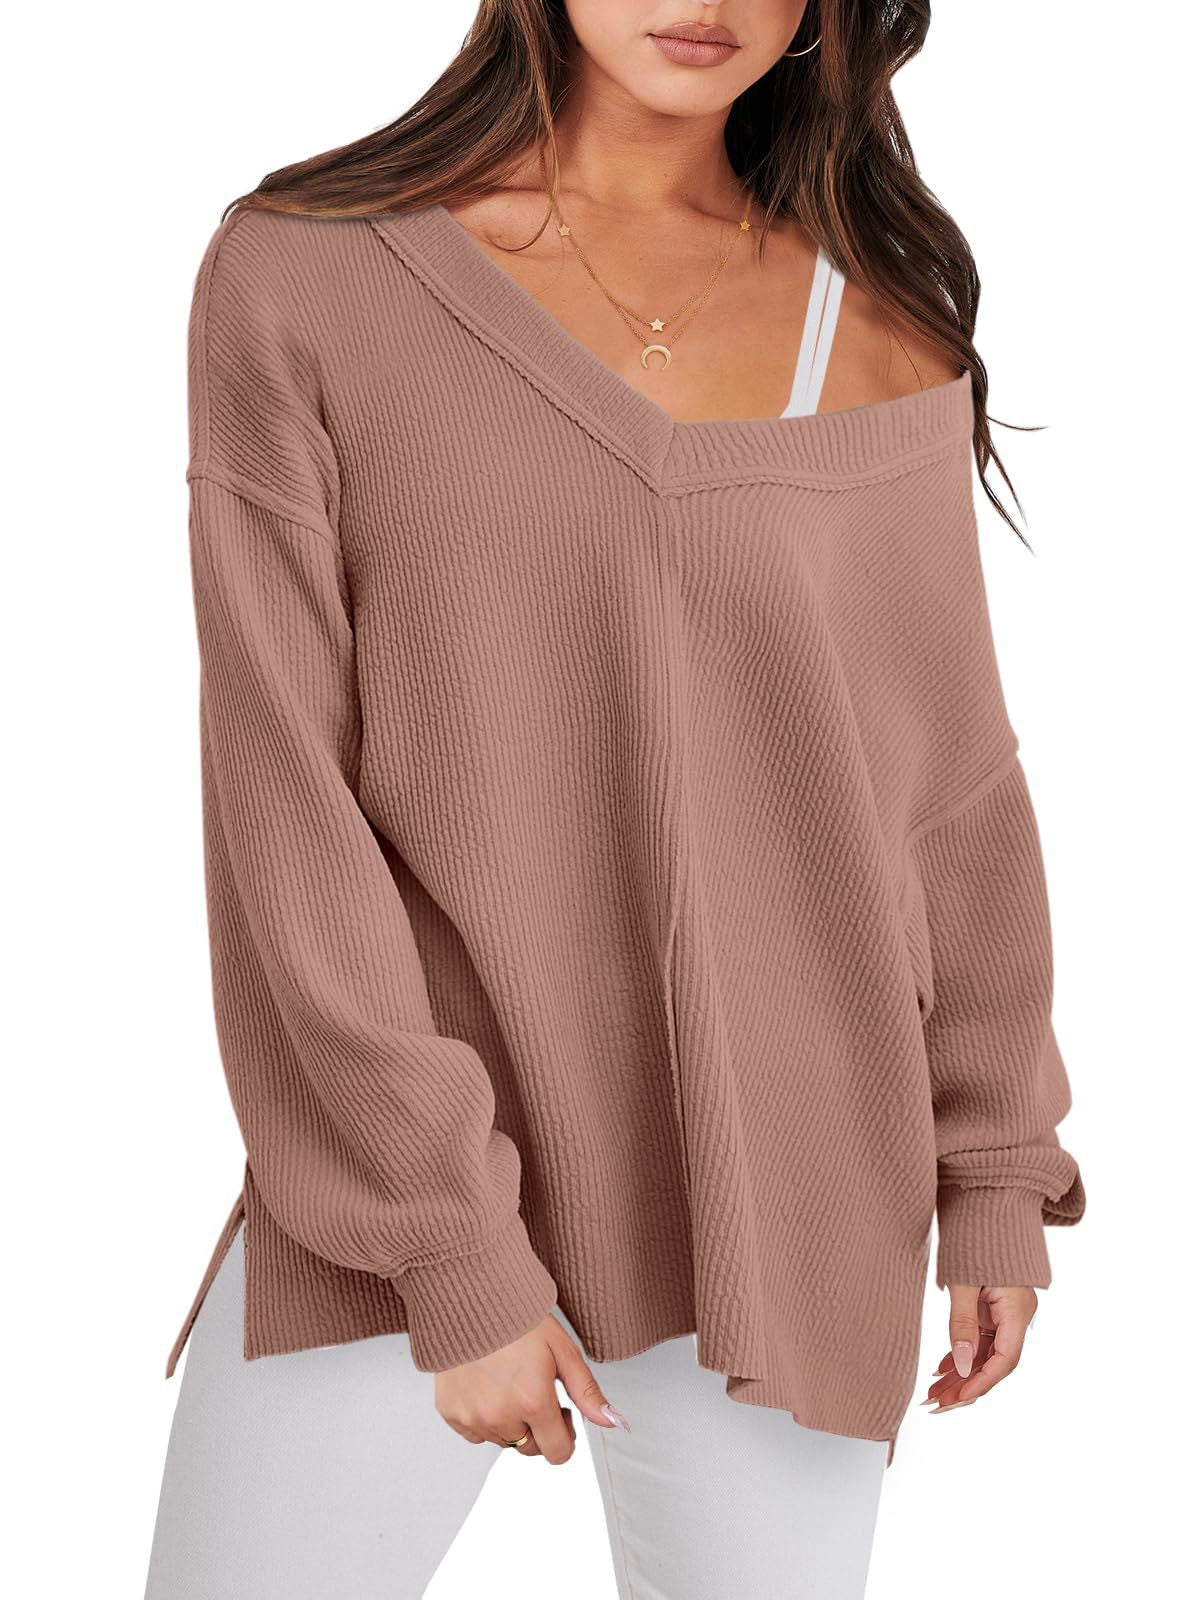 Elevate Your Wardrobe with the Fashion Lightweight V-Neck Sweater